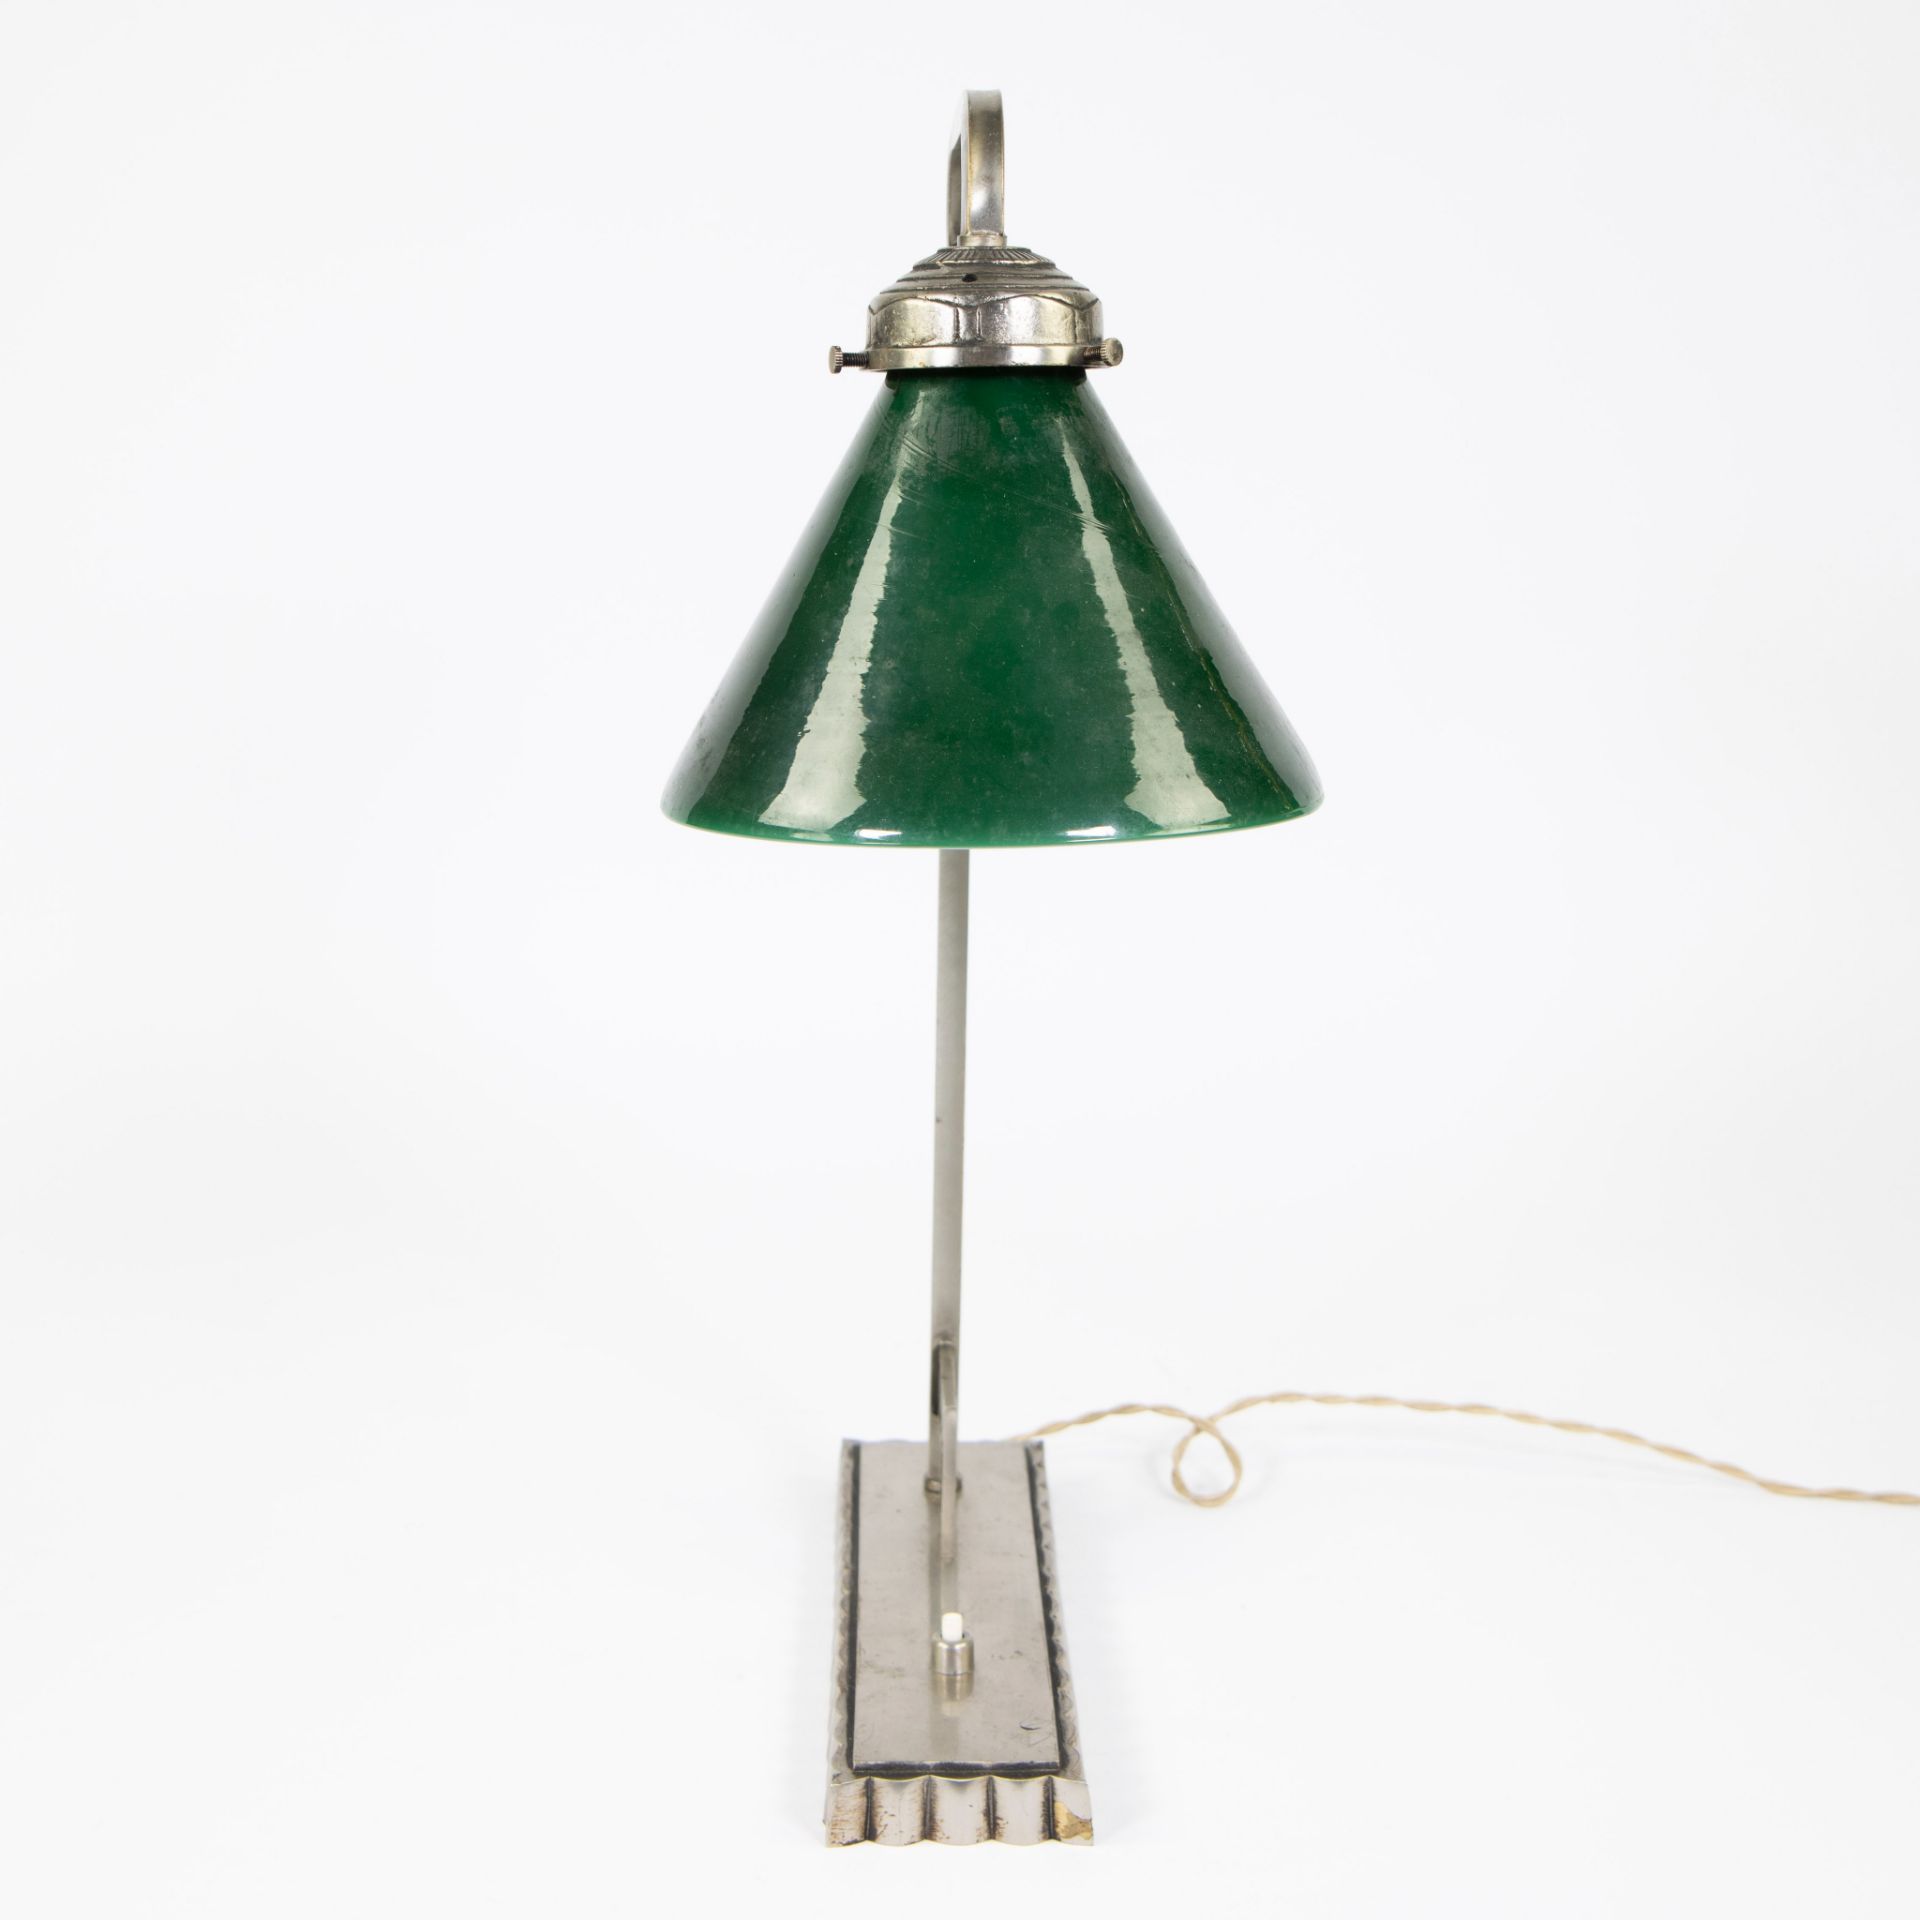 Art Deco reading lamp in silver plated metal and green glass shade - Image 2 of 4